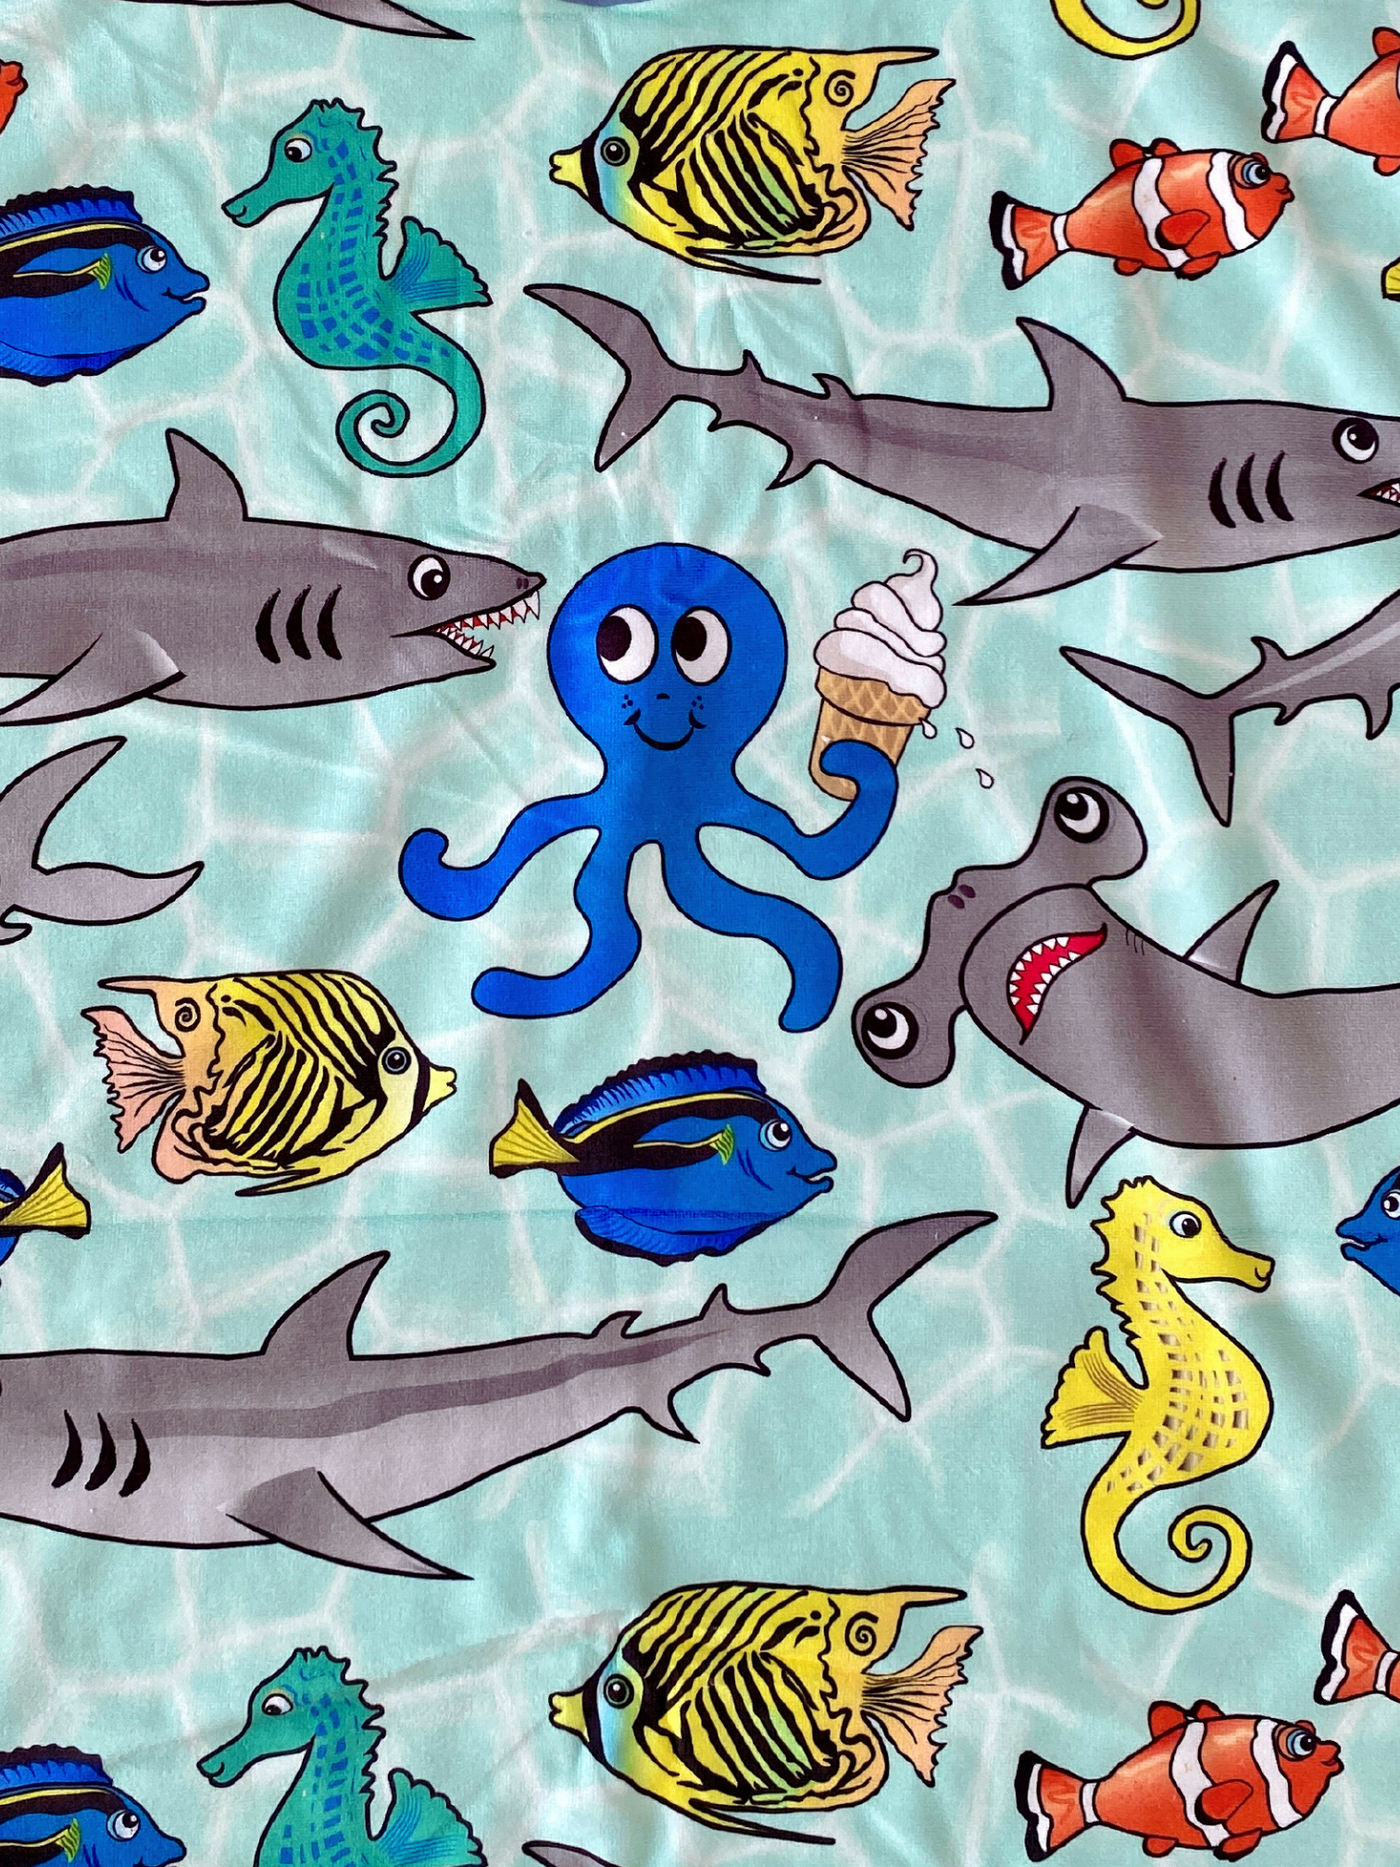 Hooded Kid Towel (18 months to 5 years): Kind Sharks' Birthday